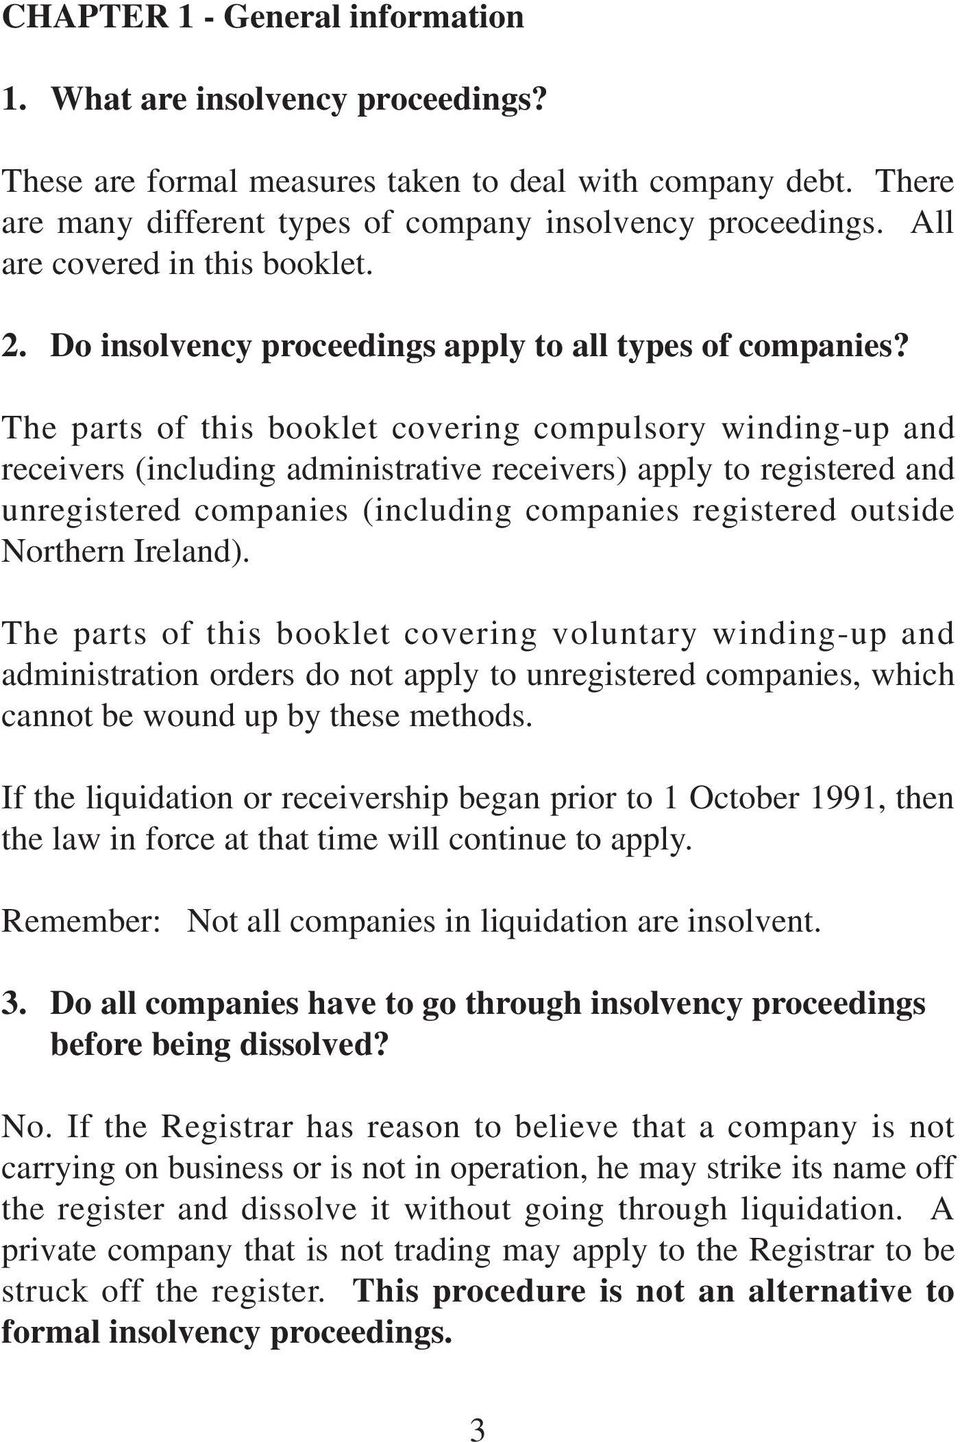 The parts of this booklet covering compulsory winding-up and receivers (including administrative receivers) apply to registered and unregistered companies (including companies registered outside